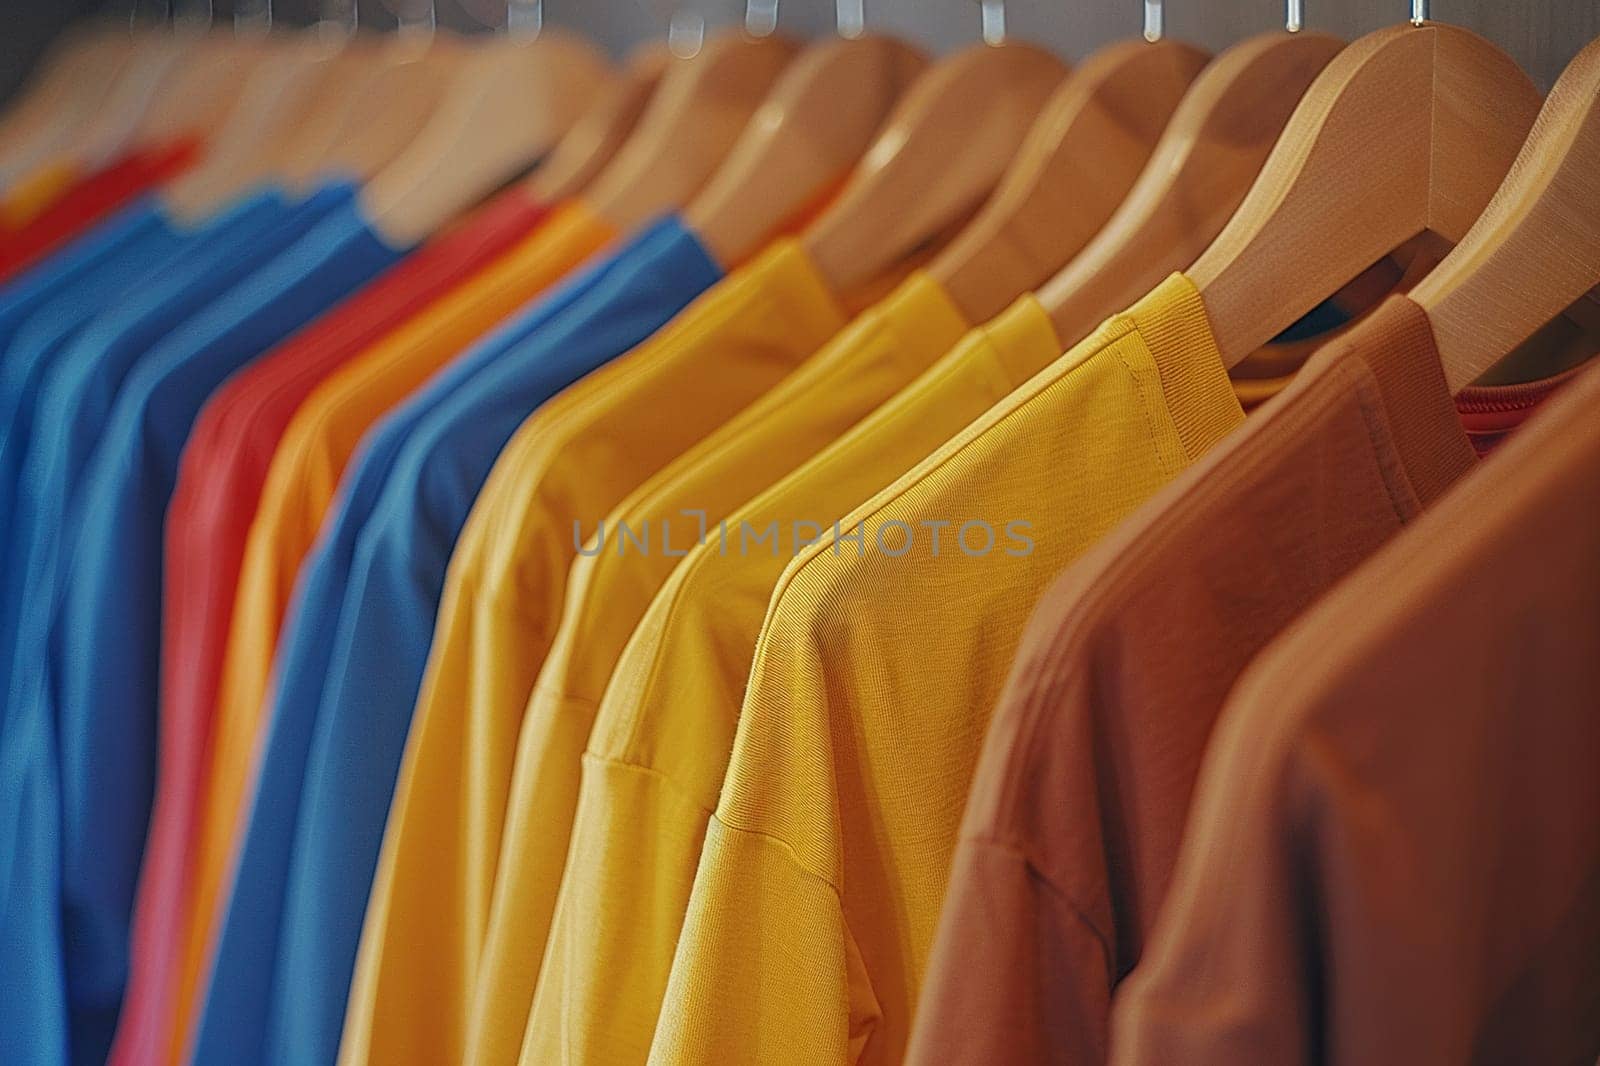 Plain T-shirts without patterns or inscriptions hang in a row on hangers. T-shirt mockups for men and women. Generated by artificial intelligence by Vovmar